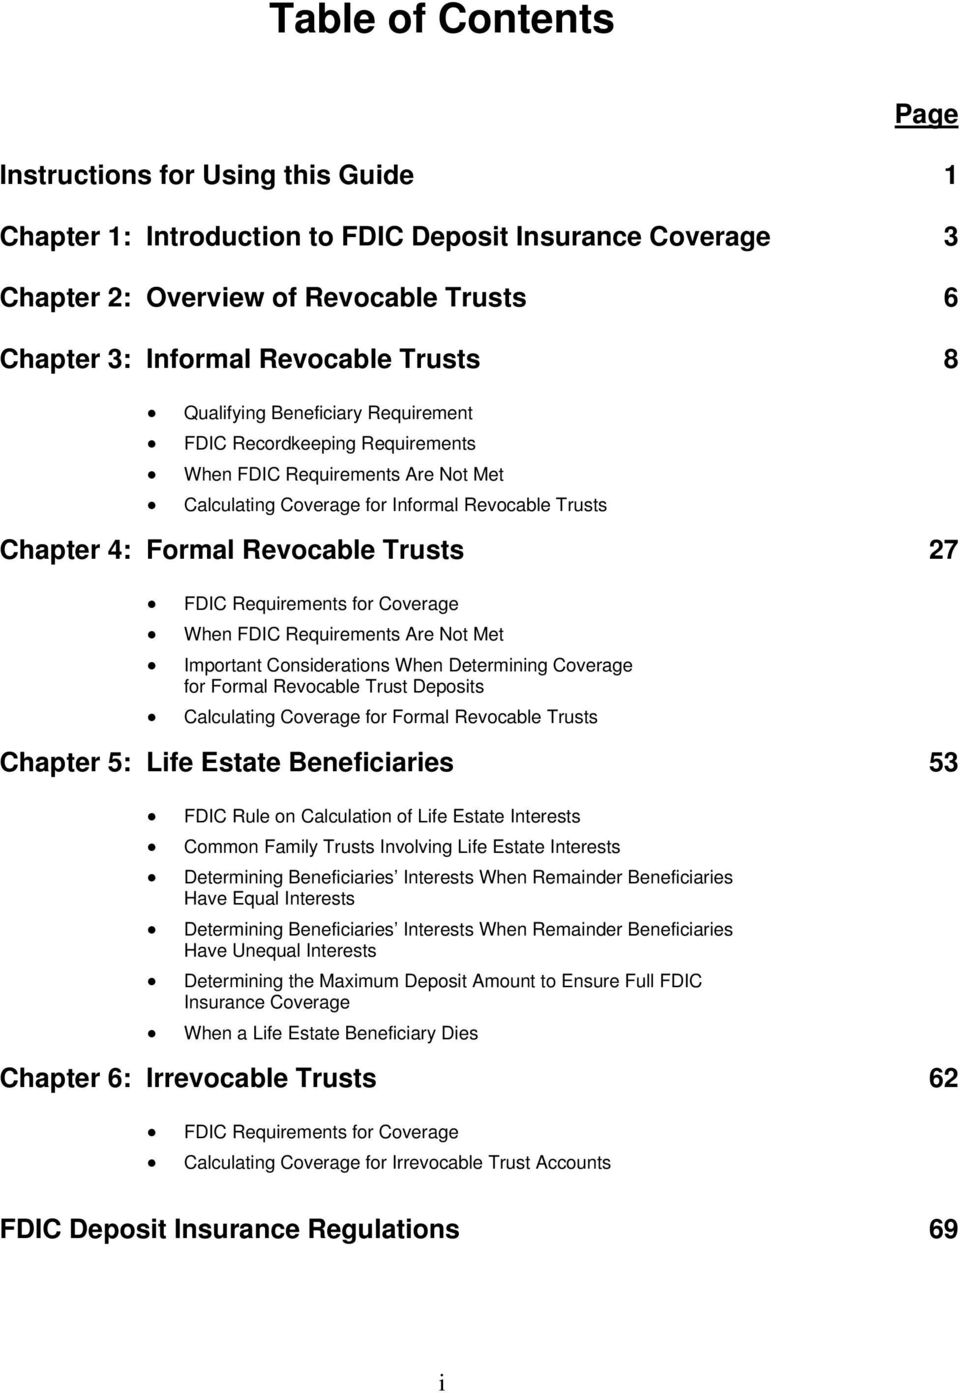 Table Of Contents Chapter 1 Introduction To Fdic Deposit Insurance Coverage Chapter 2 Overview Of Revocable Trusts 6 Pdf Free Download